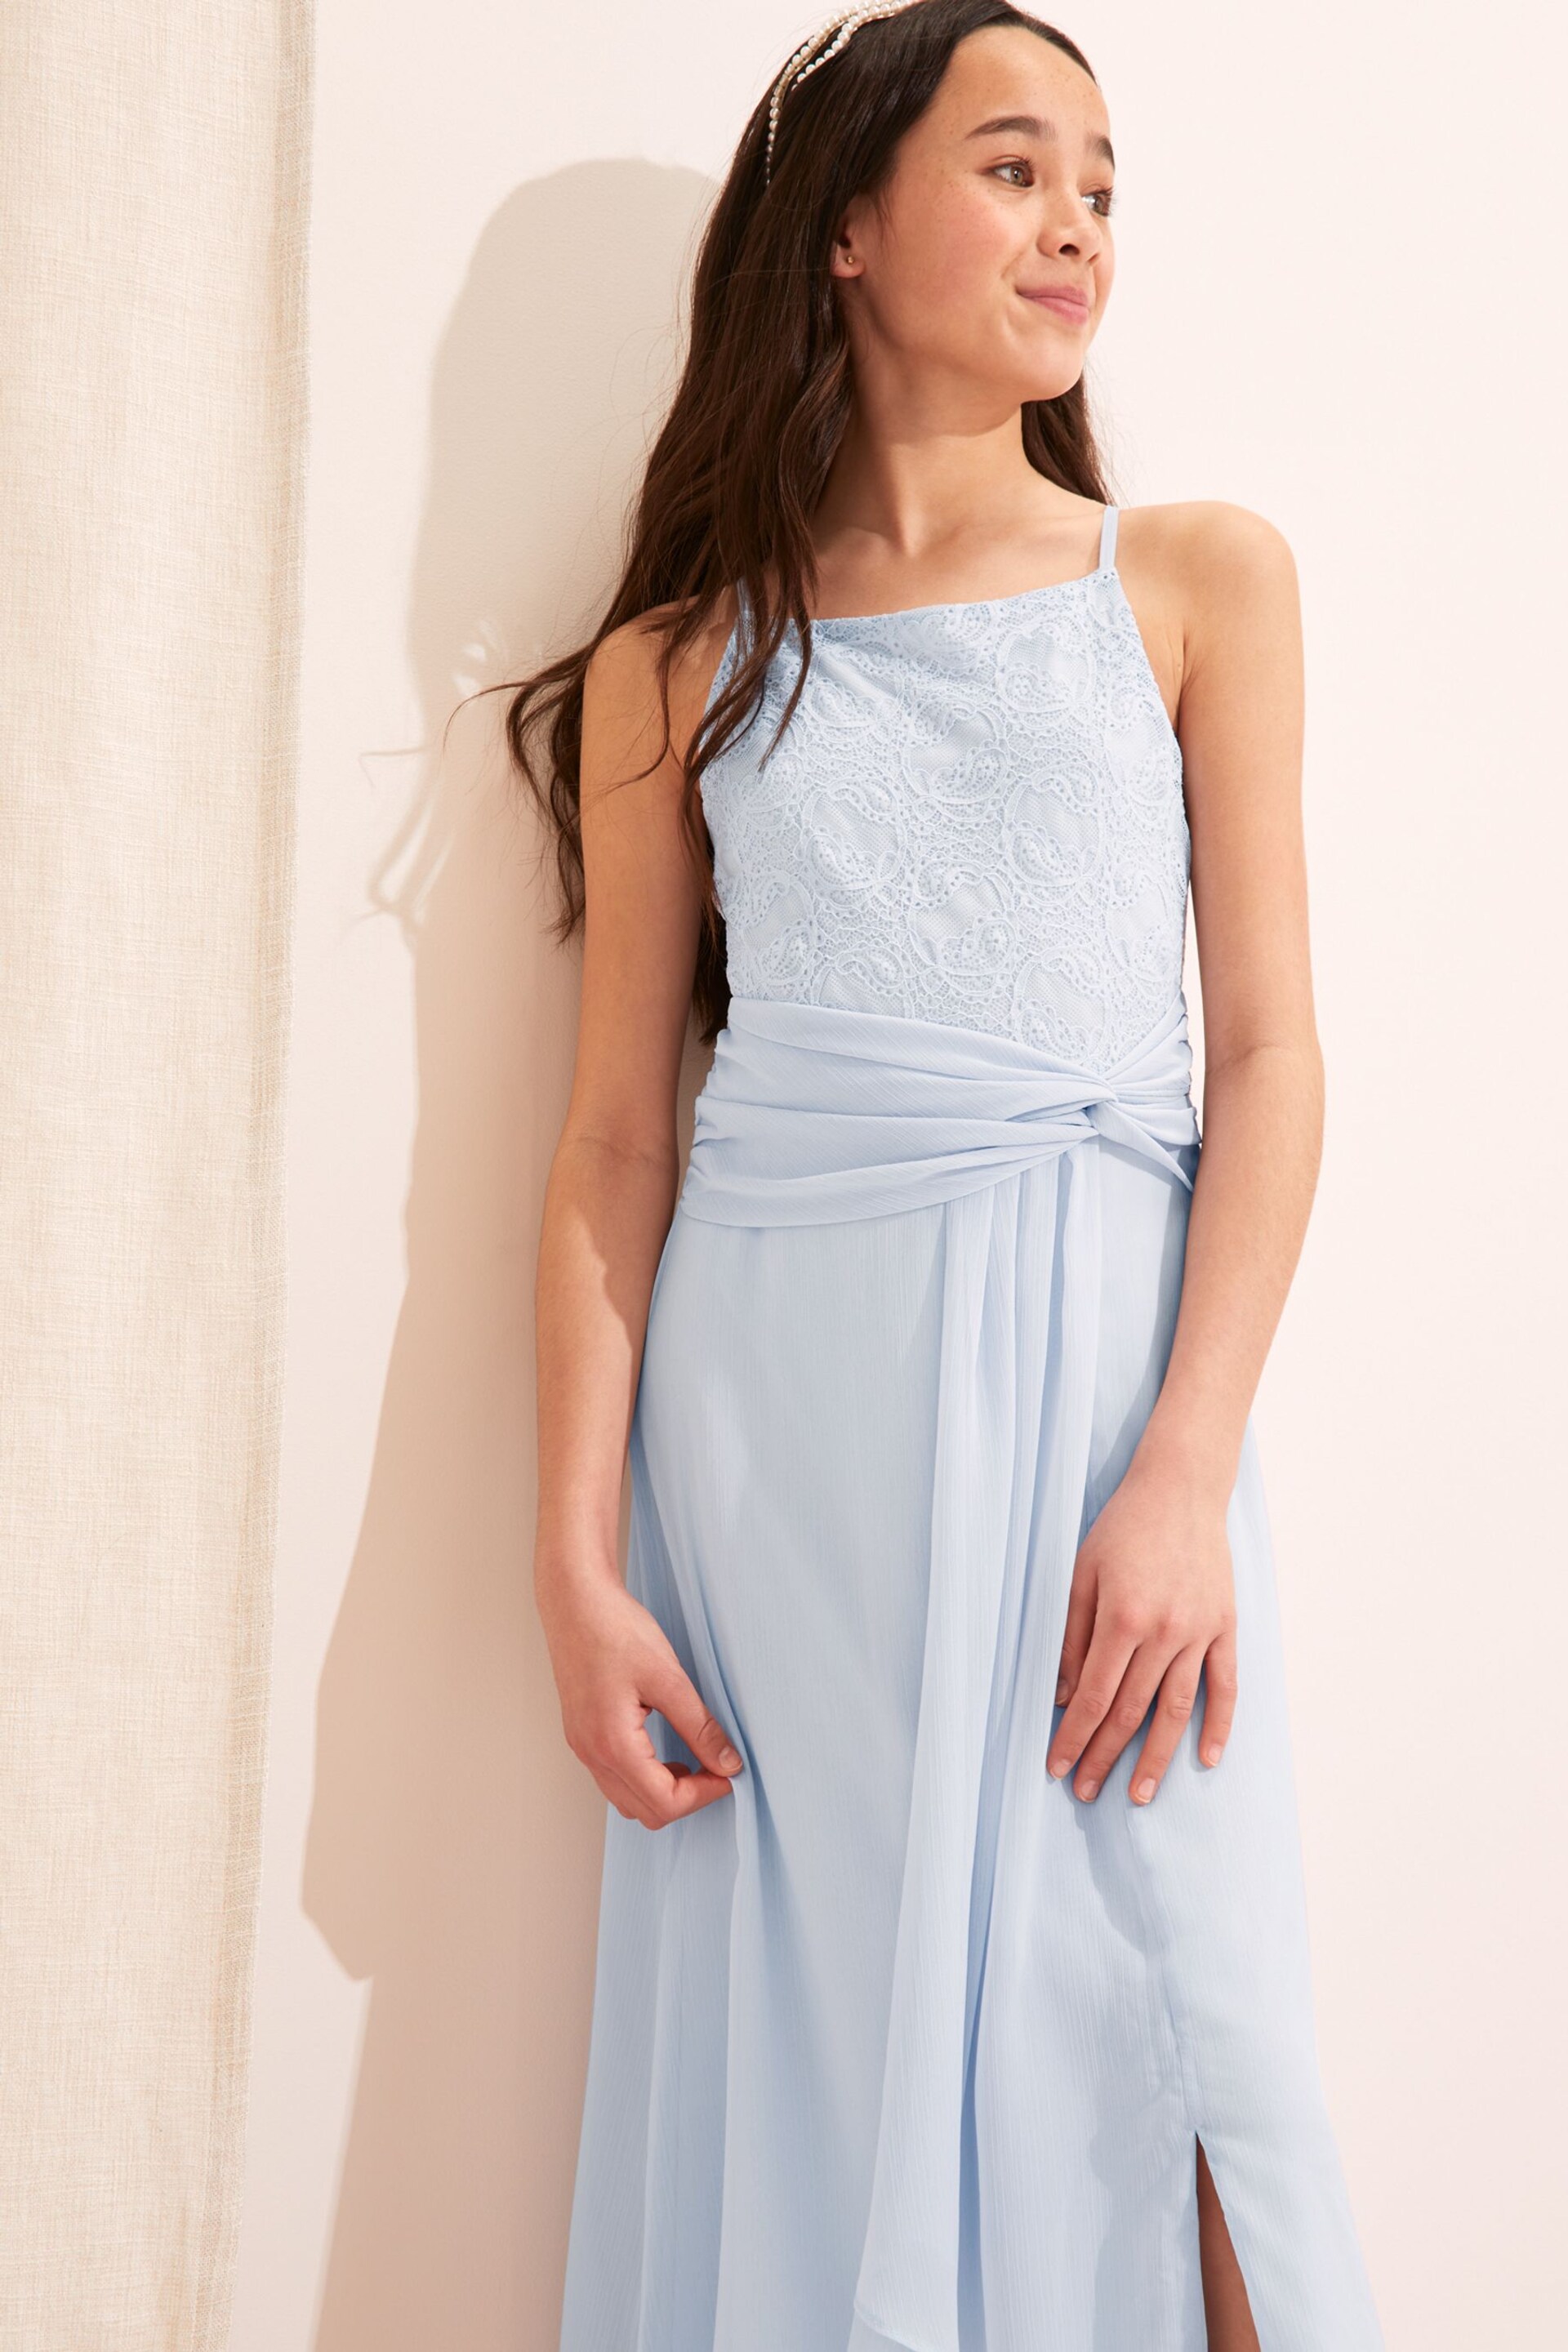 Lipsy Blue Lace Strap Maxi Occasion Dress (From 7-16yrs) - Image 3 of 4